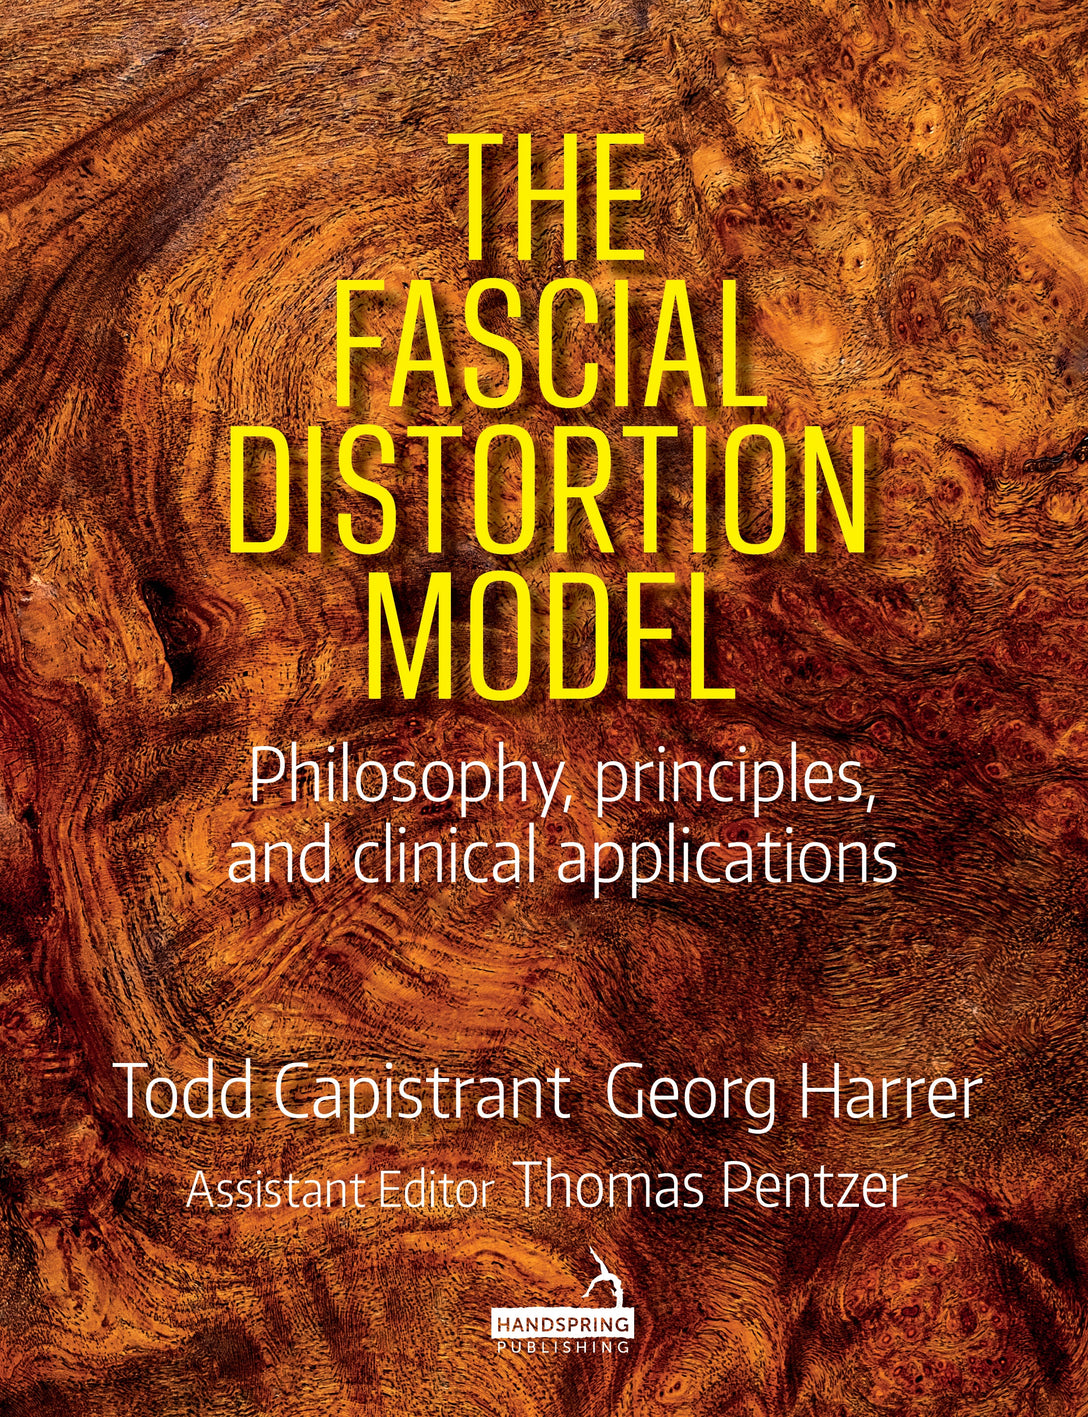 The Fascial Distortion Model by Todd Capistrant, Georg Harrer, Thomas Pentzer